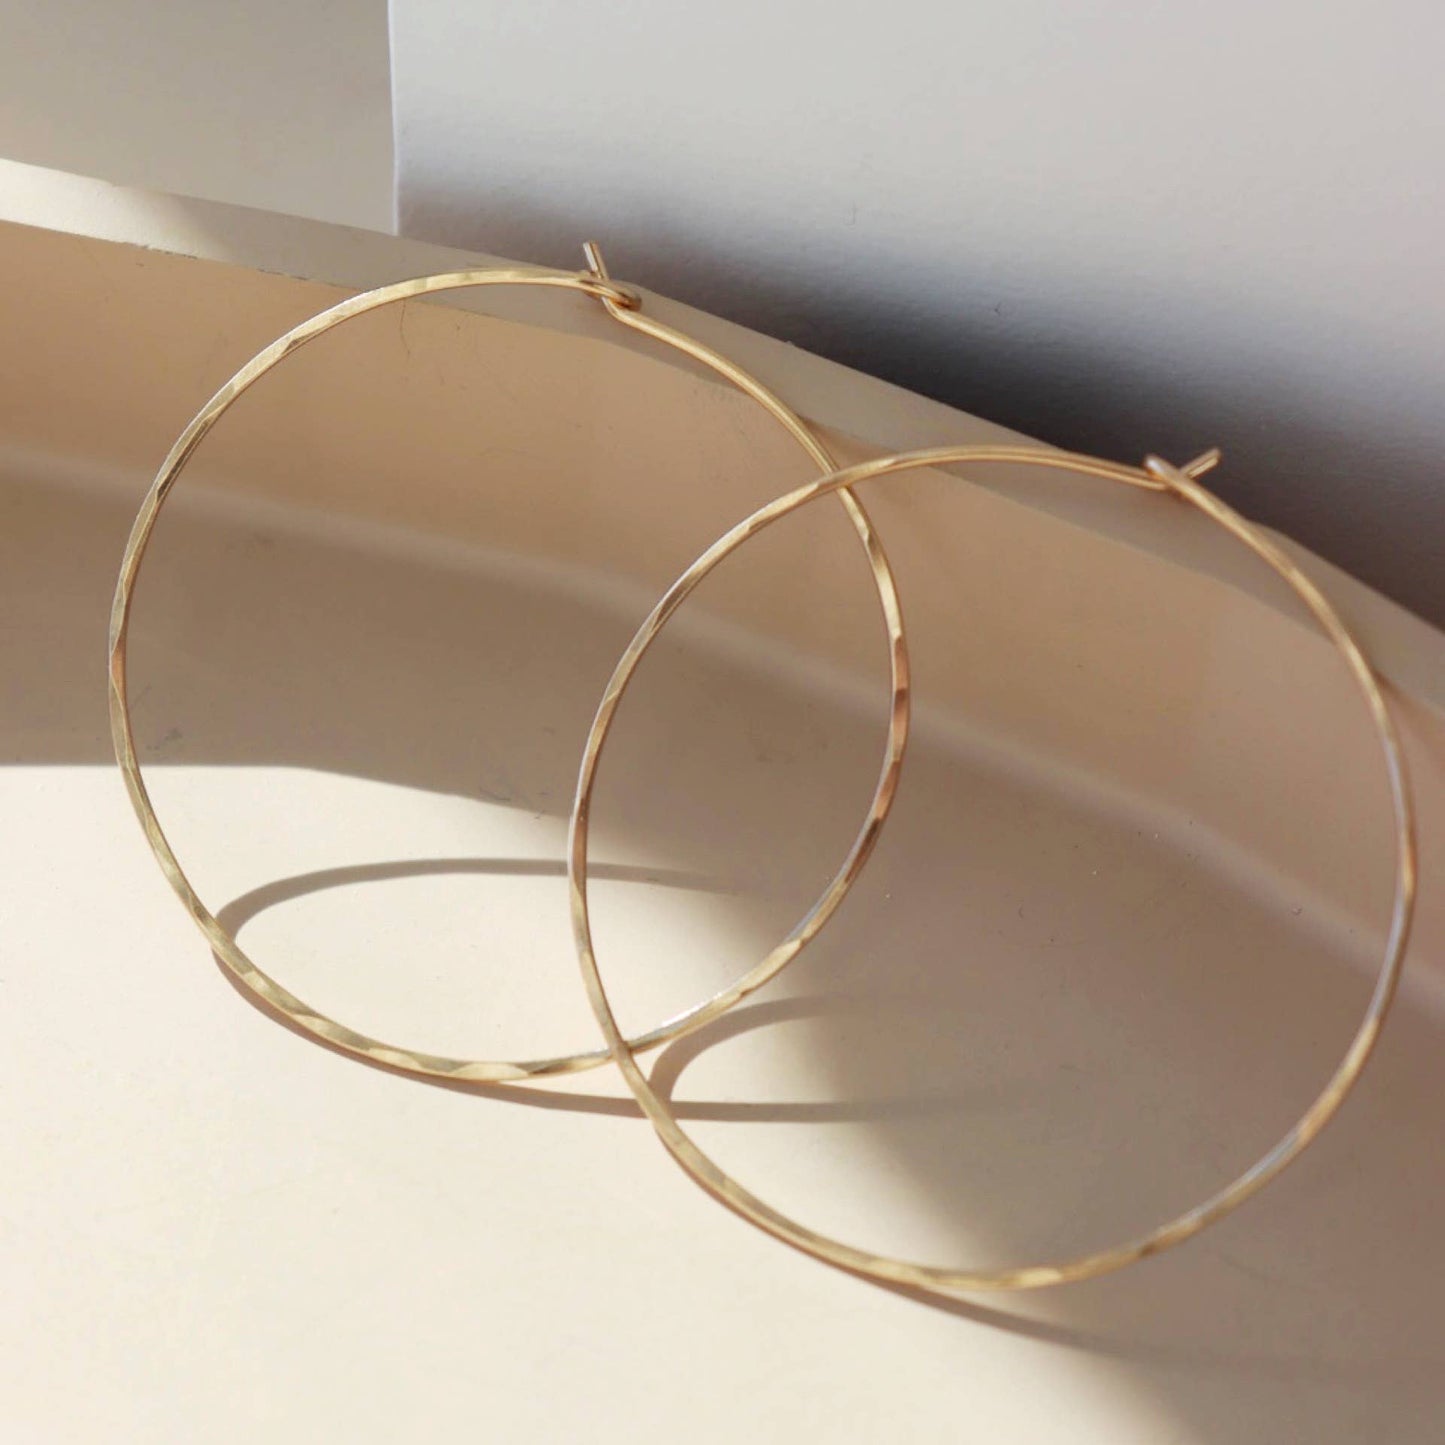 Token Jewelry | Organic Hoops - 14k Rose Gold Fill / Large